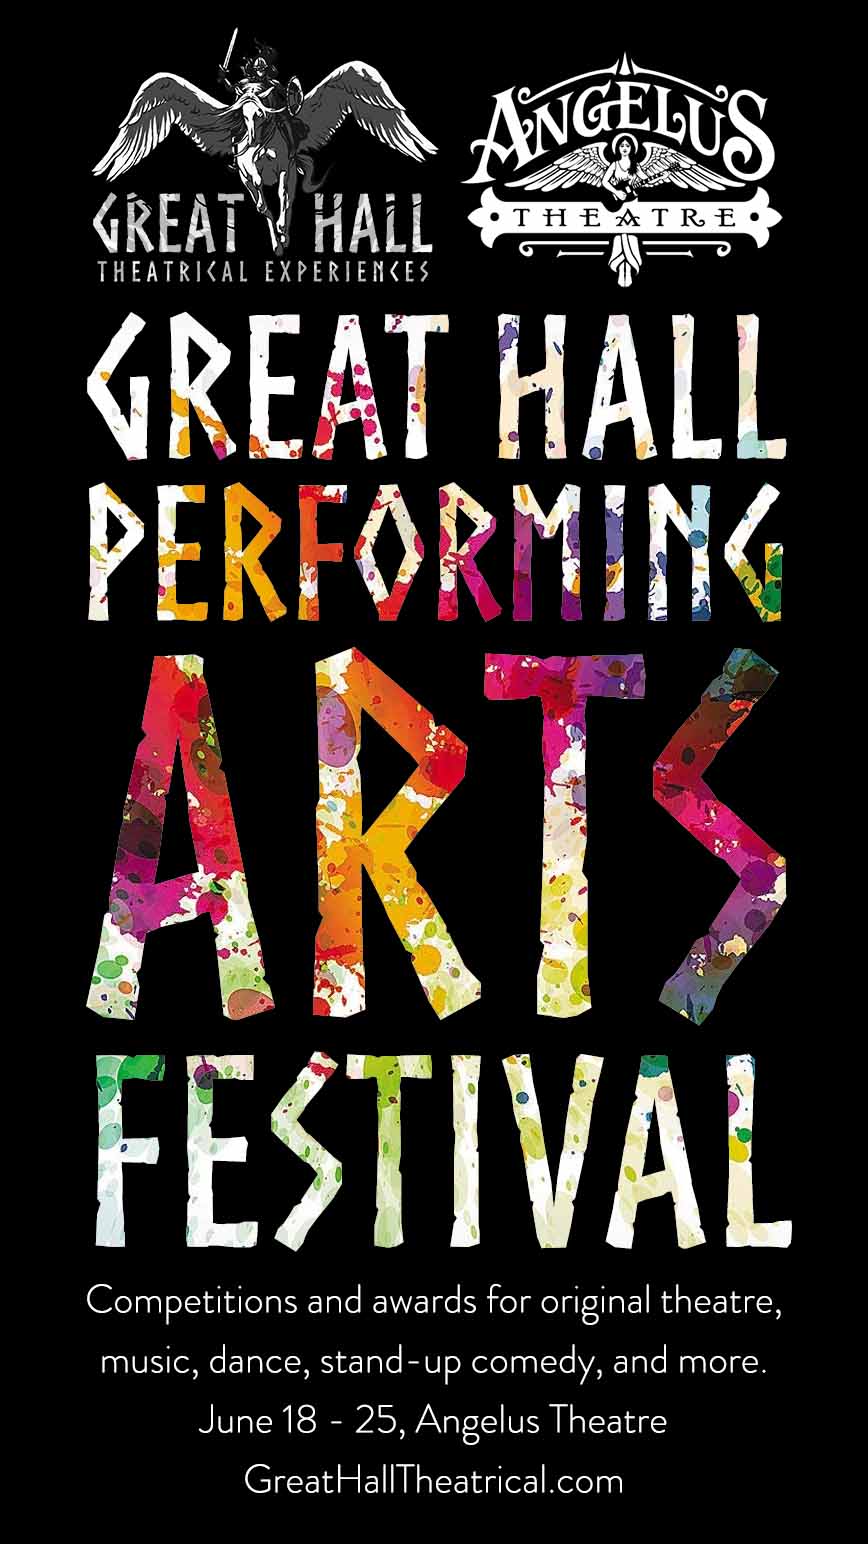 Great Hall Performing Arts Festival at the Angelus Theatre 2022